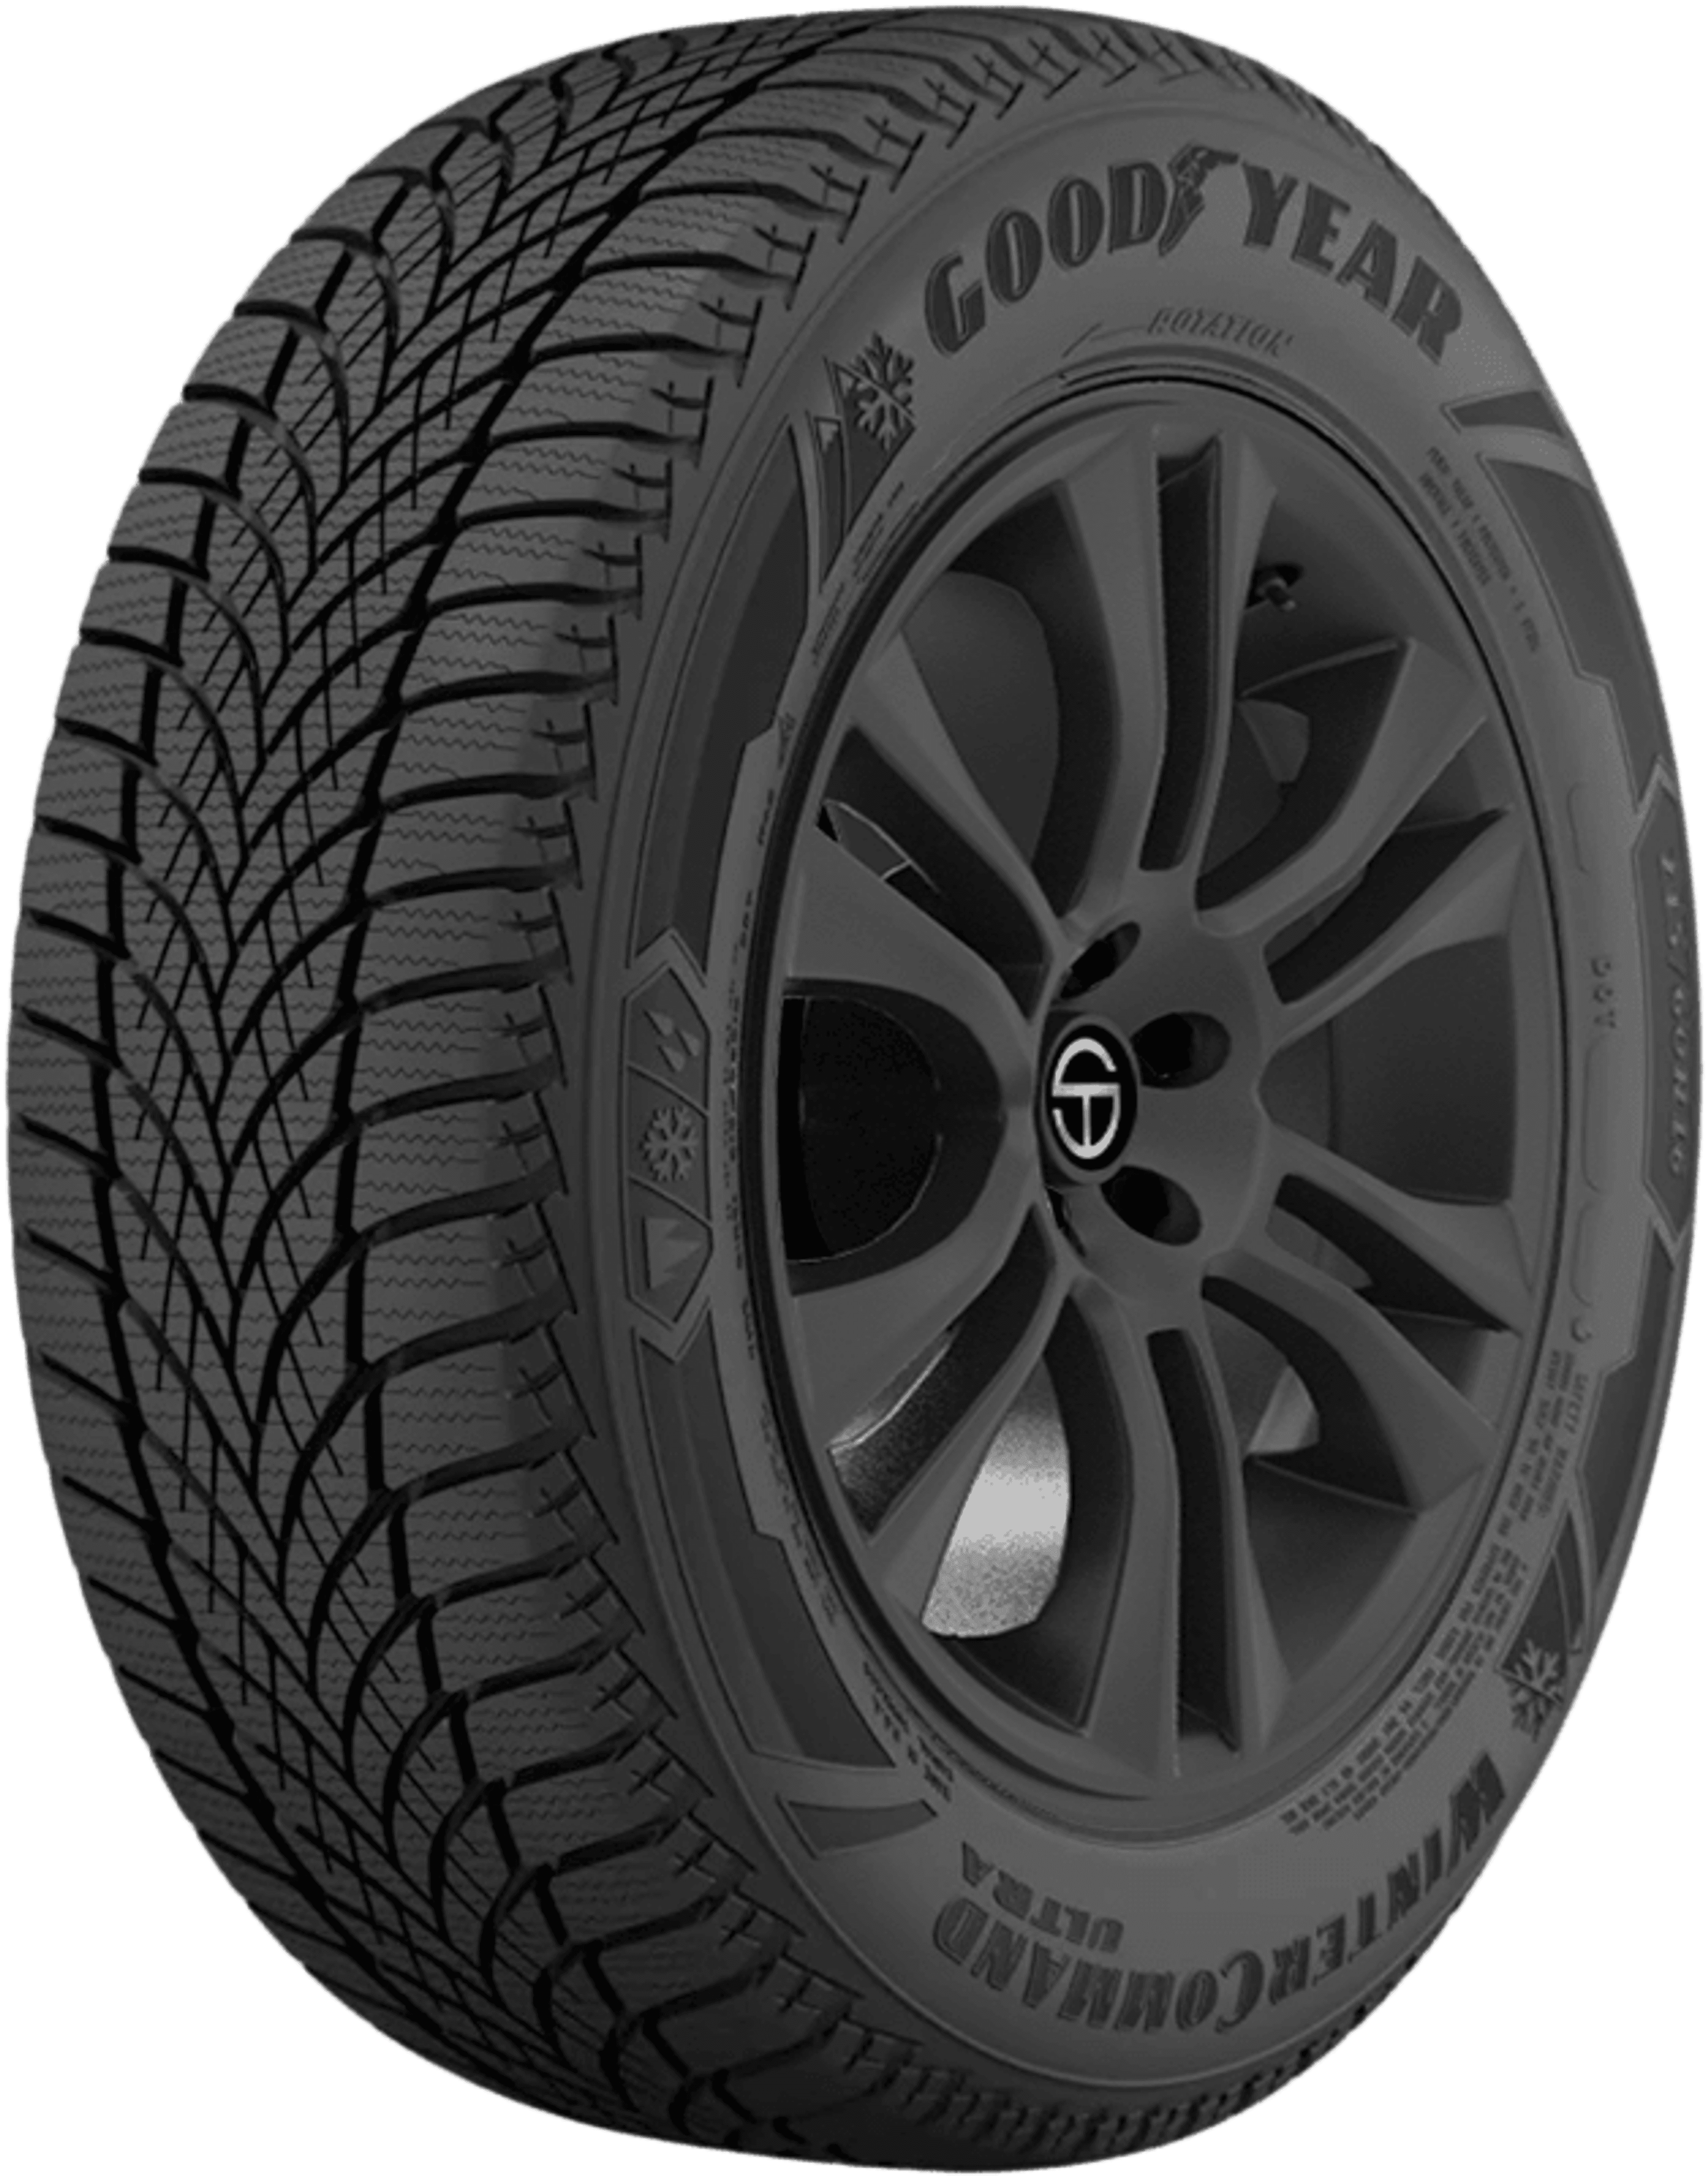 Winter | SimpleTire Buy Goodyear Command Tires Online Ultra